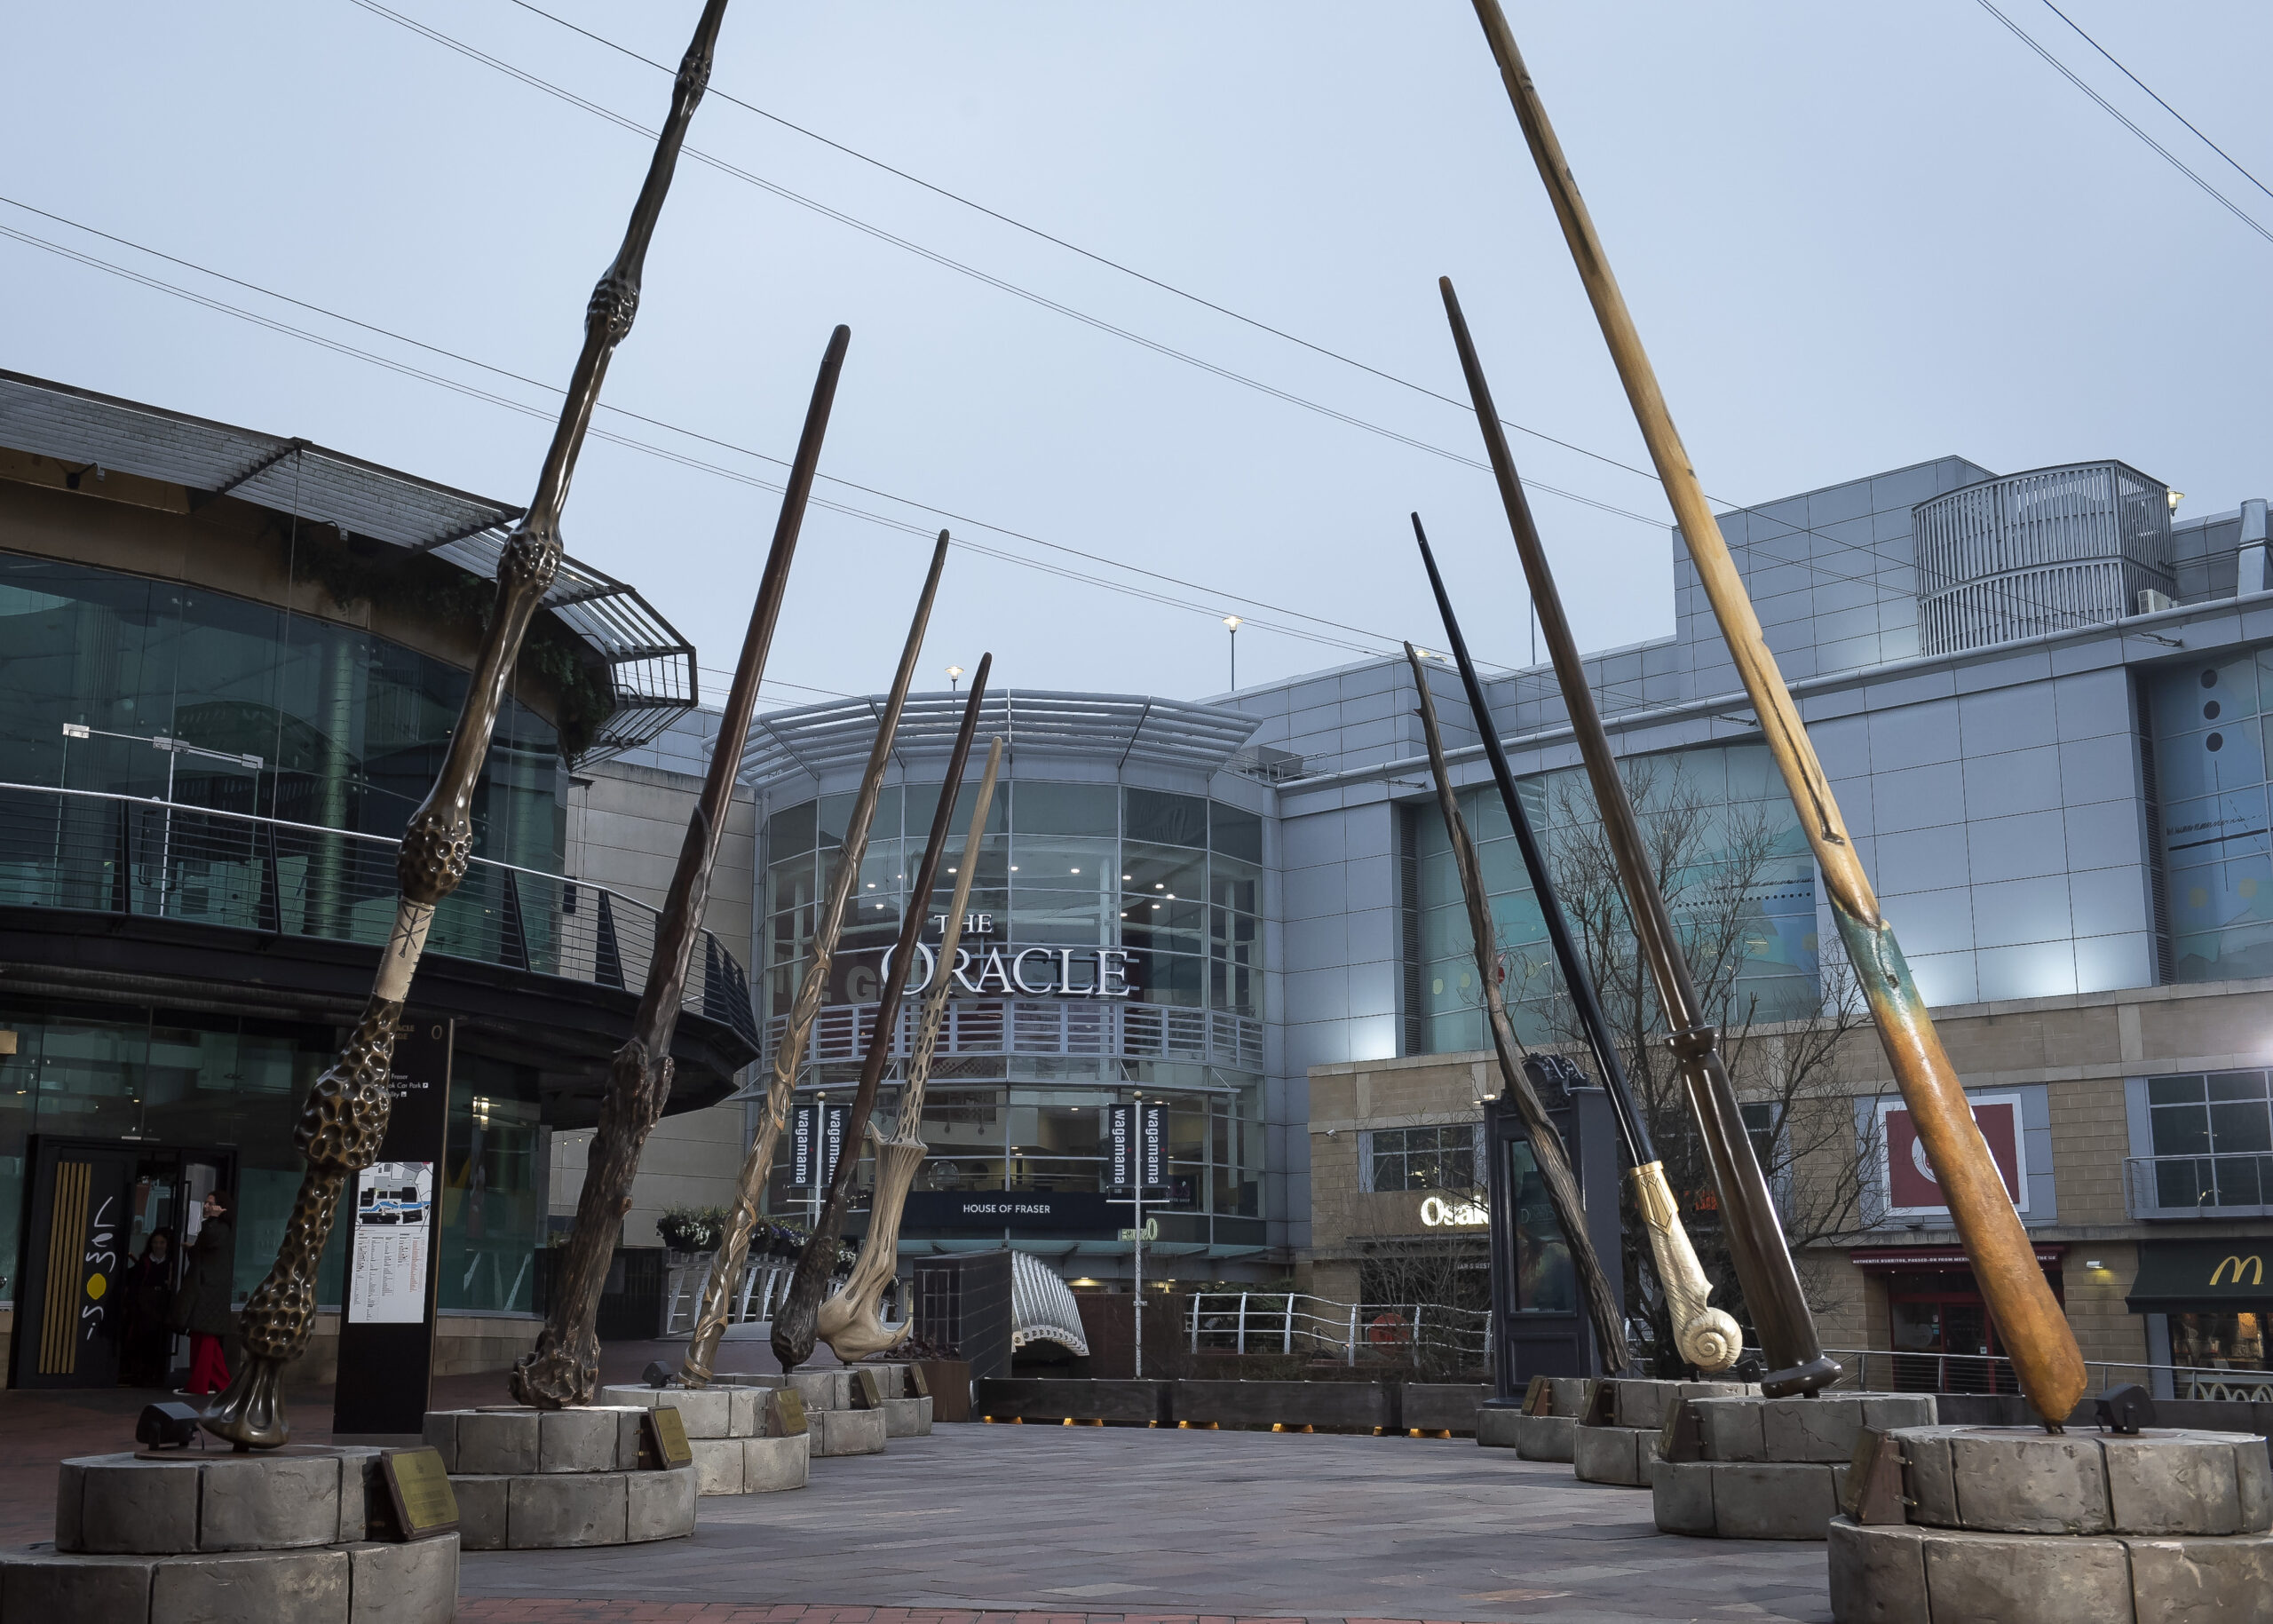 The Wizarding World wand installation will remain at the Oracle Shopping Centre in Reading until April 5, allowing fans to take photos.